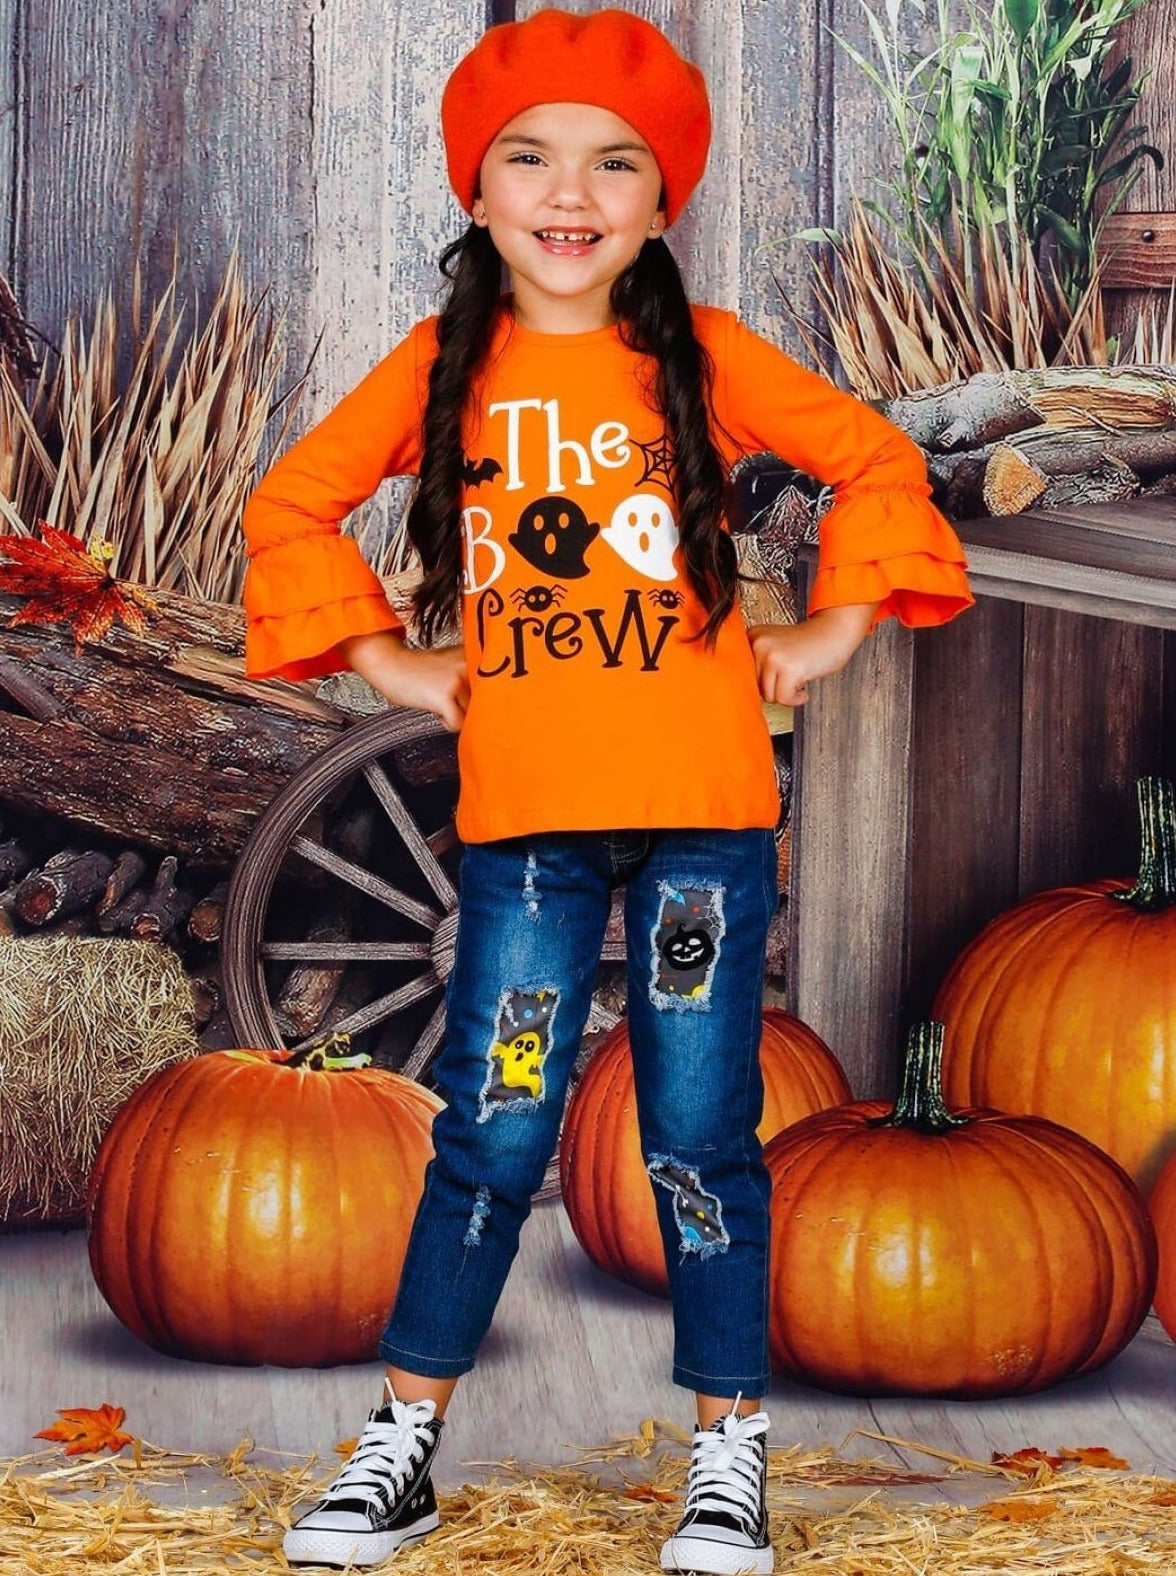 Girls Fall Outfits | Ghost Top & Patched Jeans Set - Mia Belle Girls